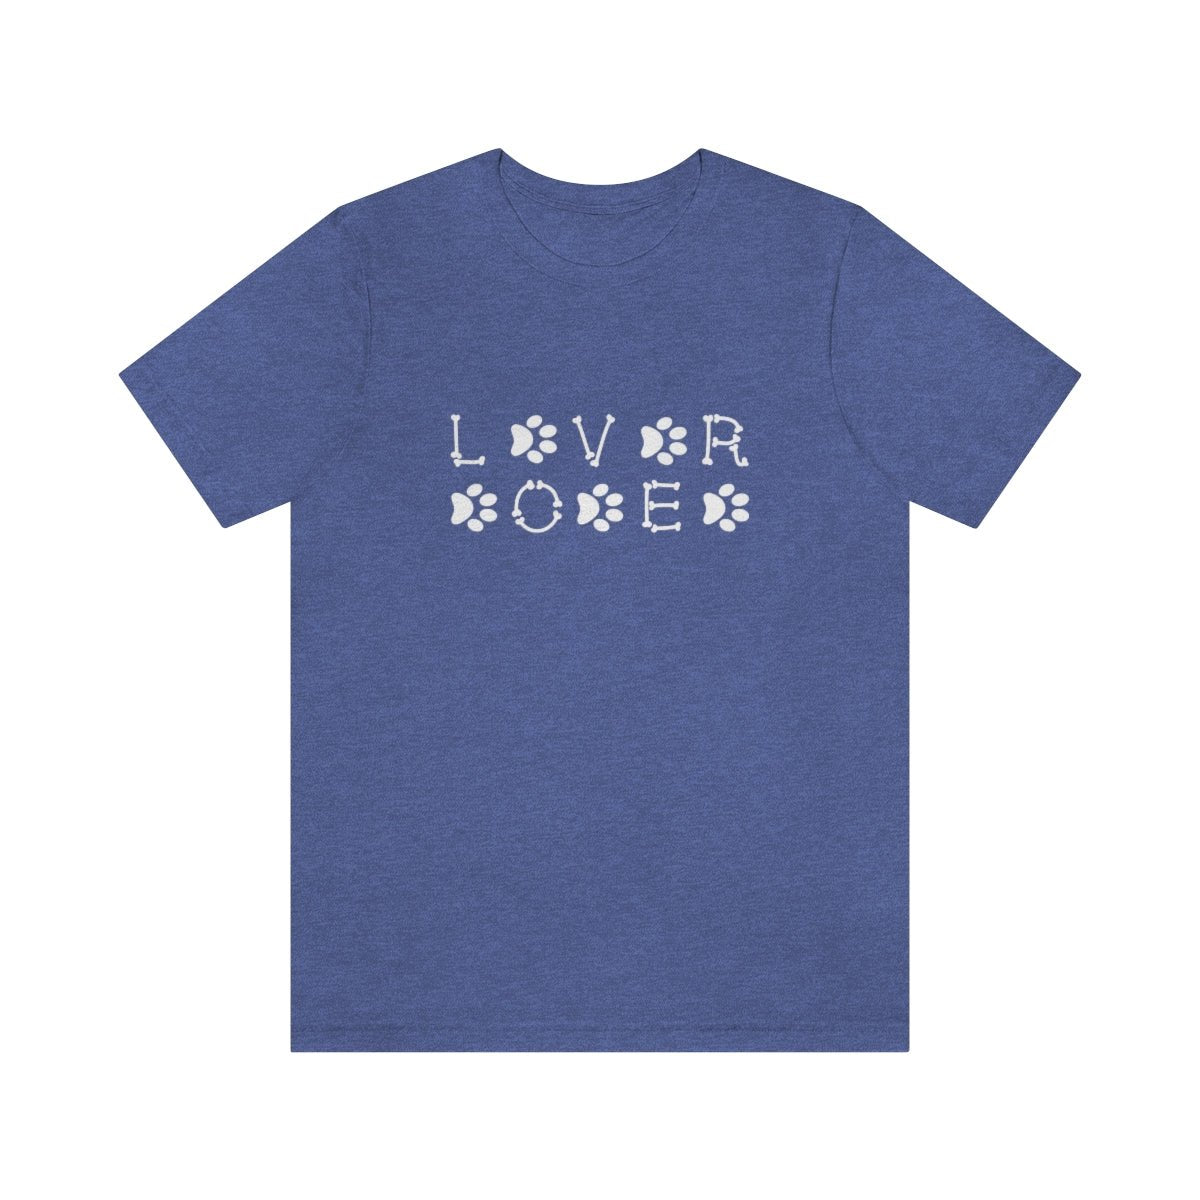 Dog Lover Women's Royal Blue Jersey Short Sleeve Tee - ZumBuys